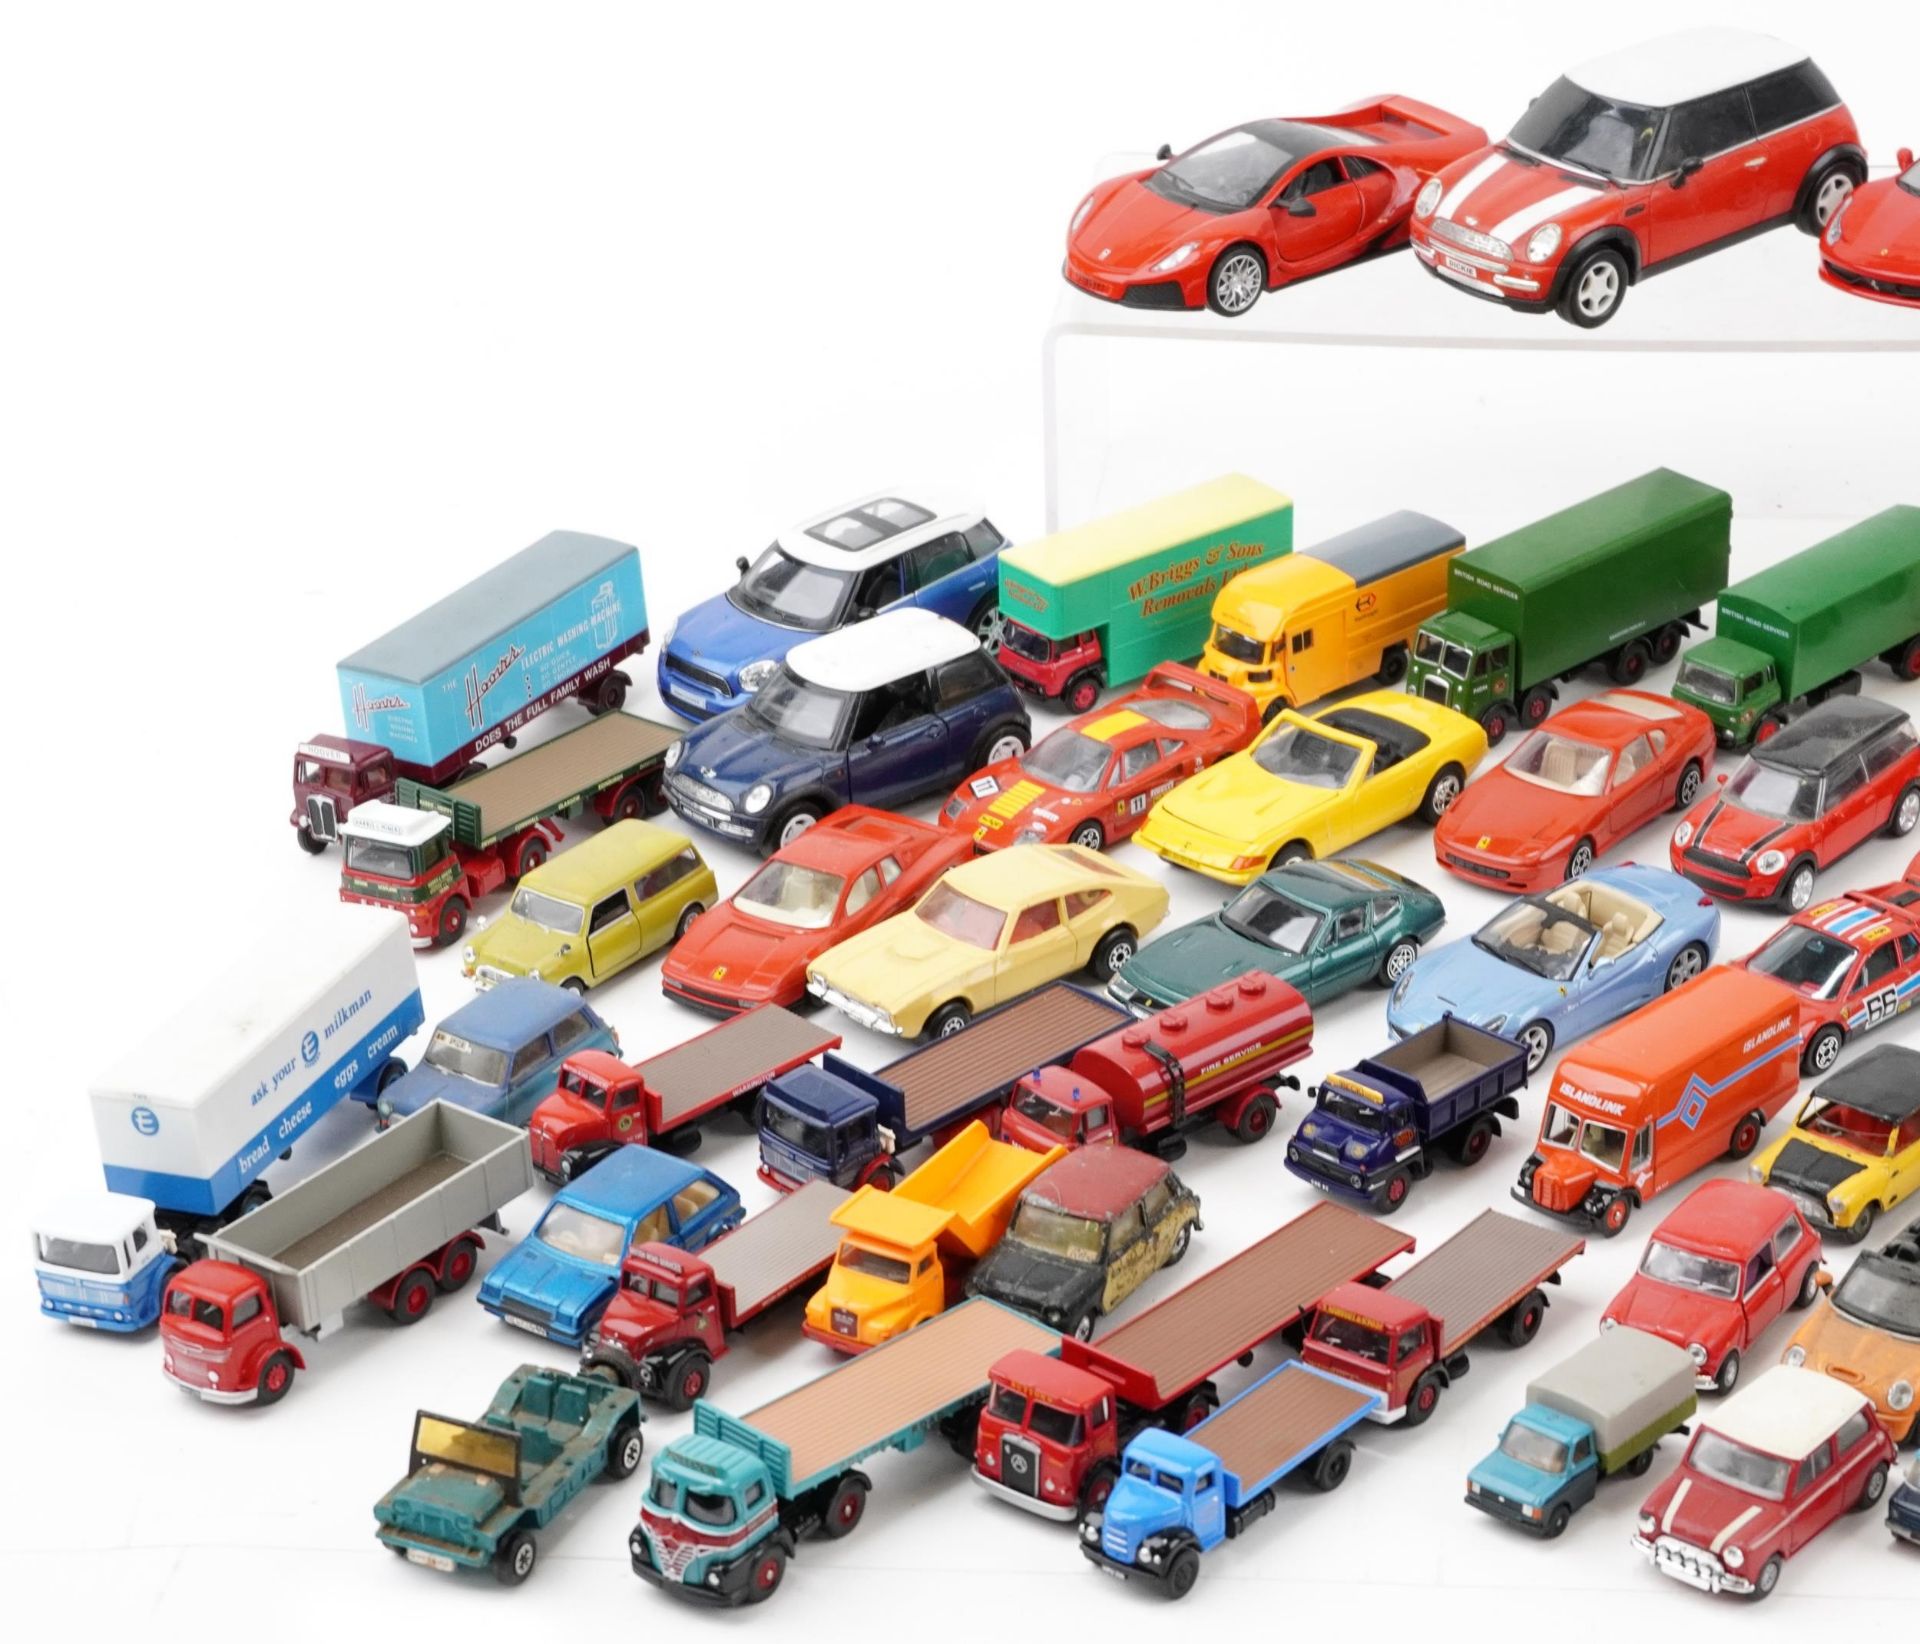 Large collection of vintage and later collector's vehicles, predominantly diecast, including Burago, - Image 2 of 4